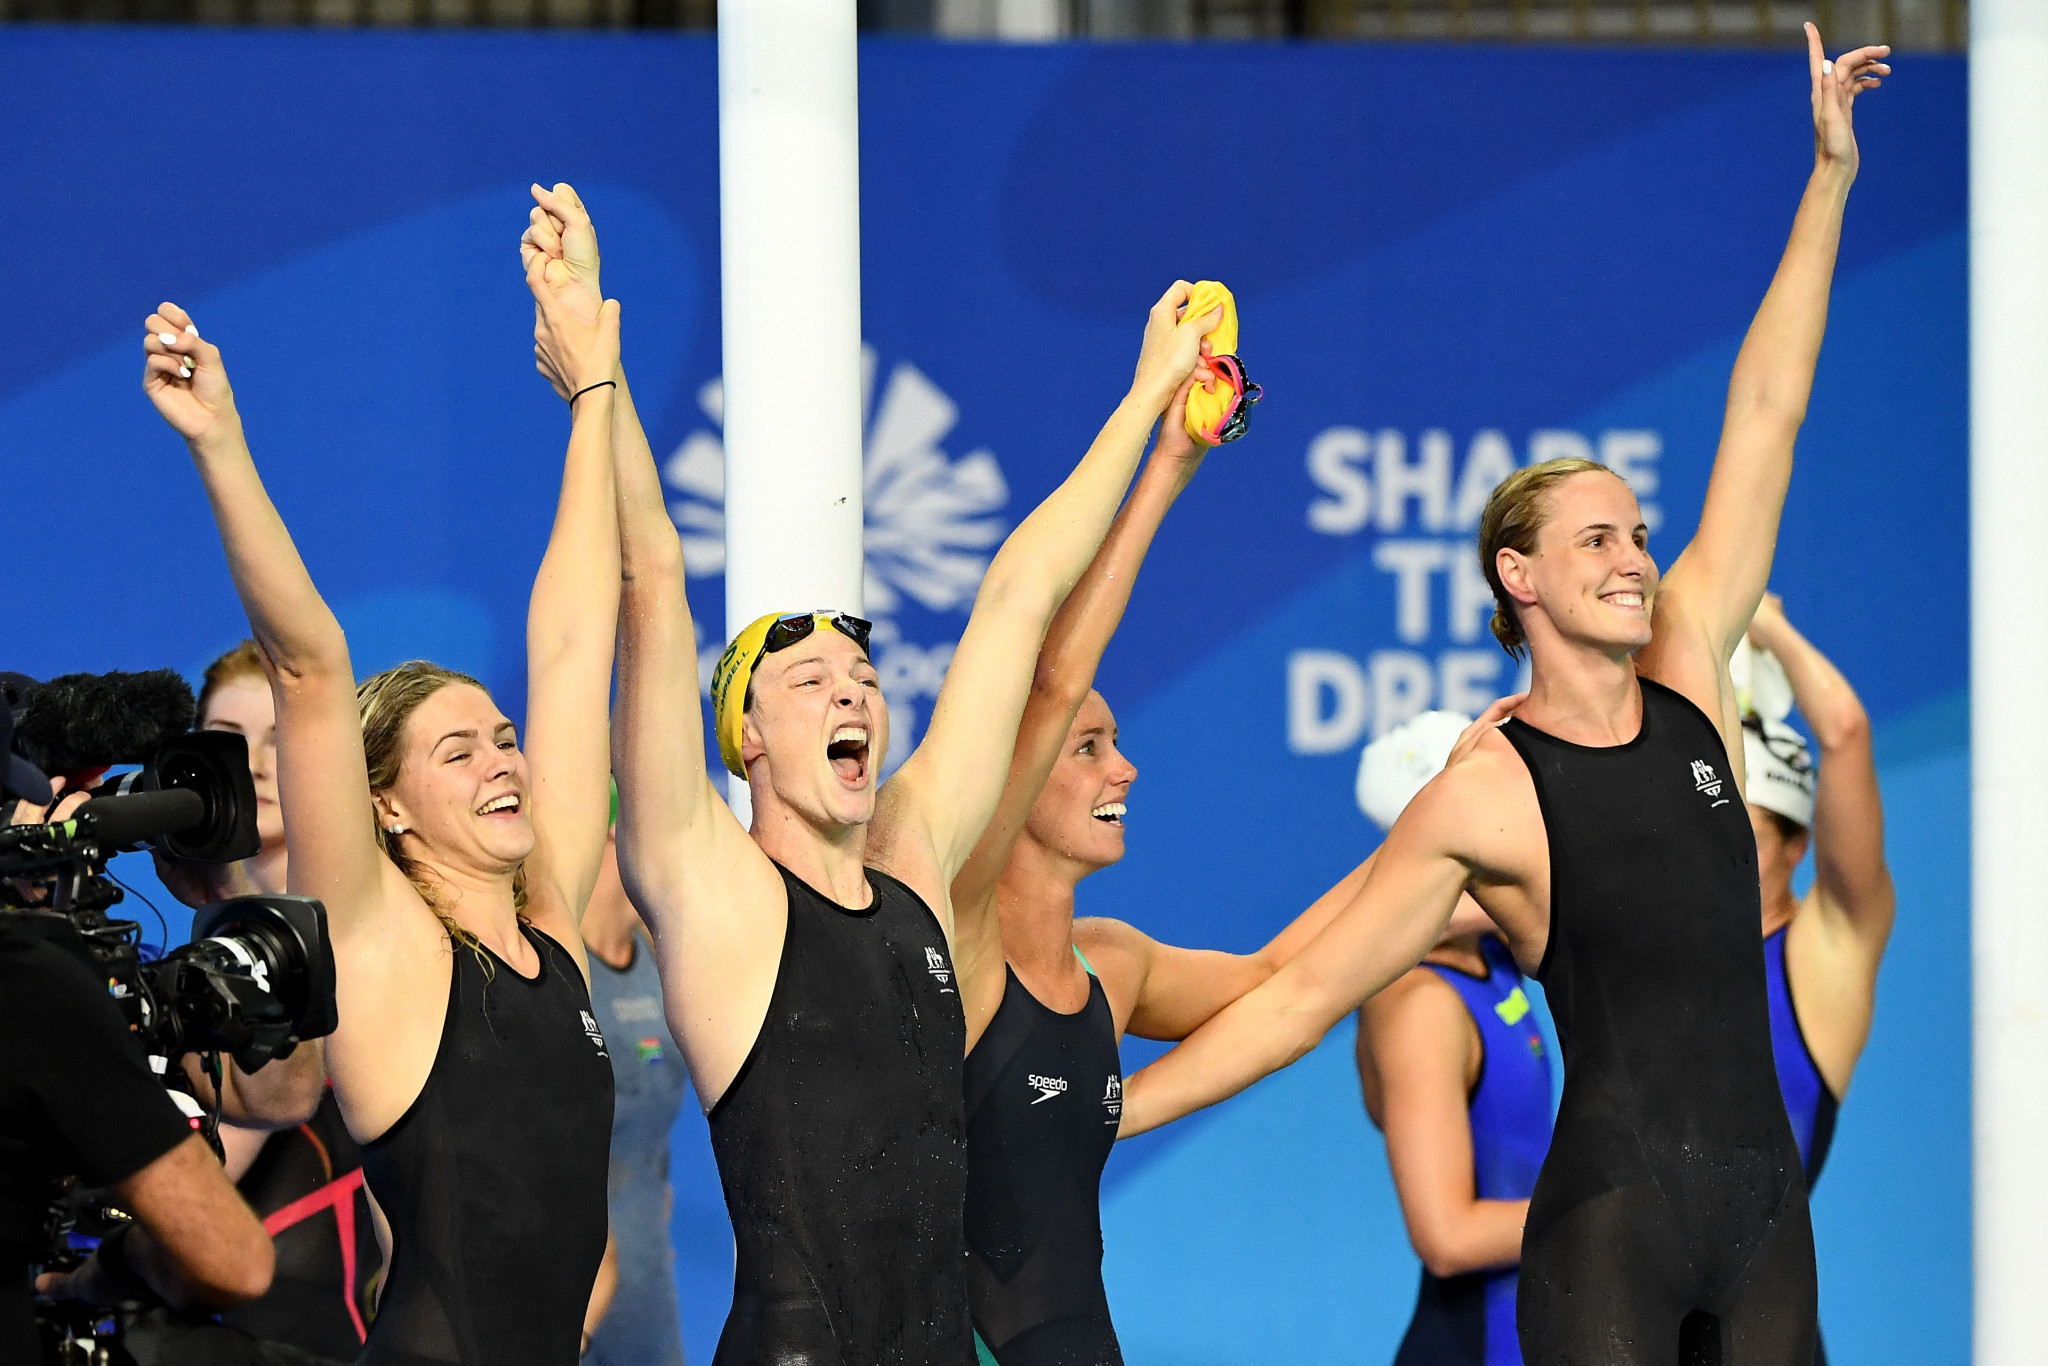 Australia break world relay record as England deliver swimming performance fit for watching Prince at Gold Coast 2018